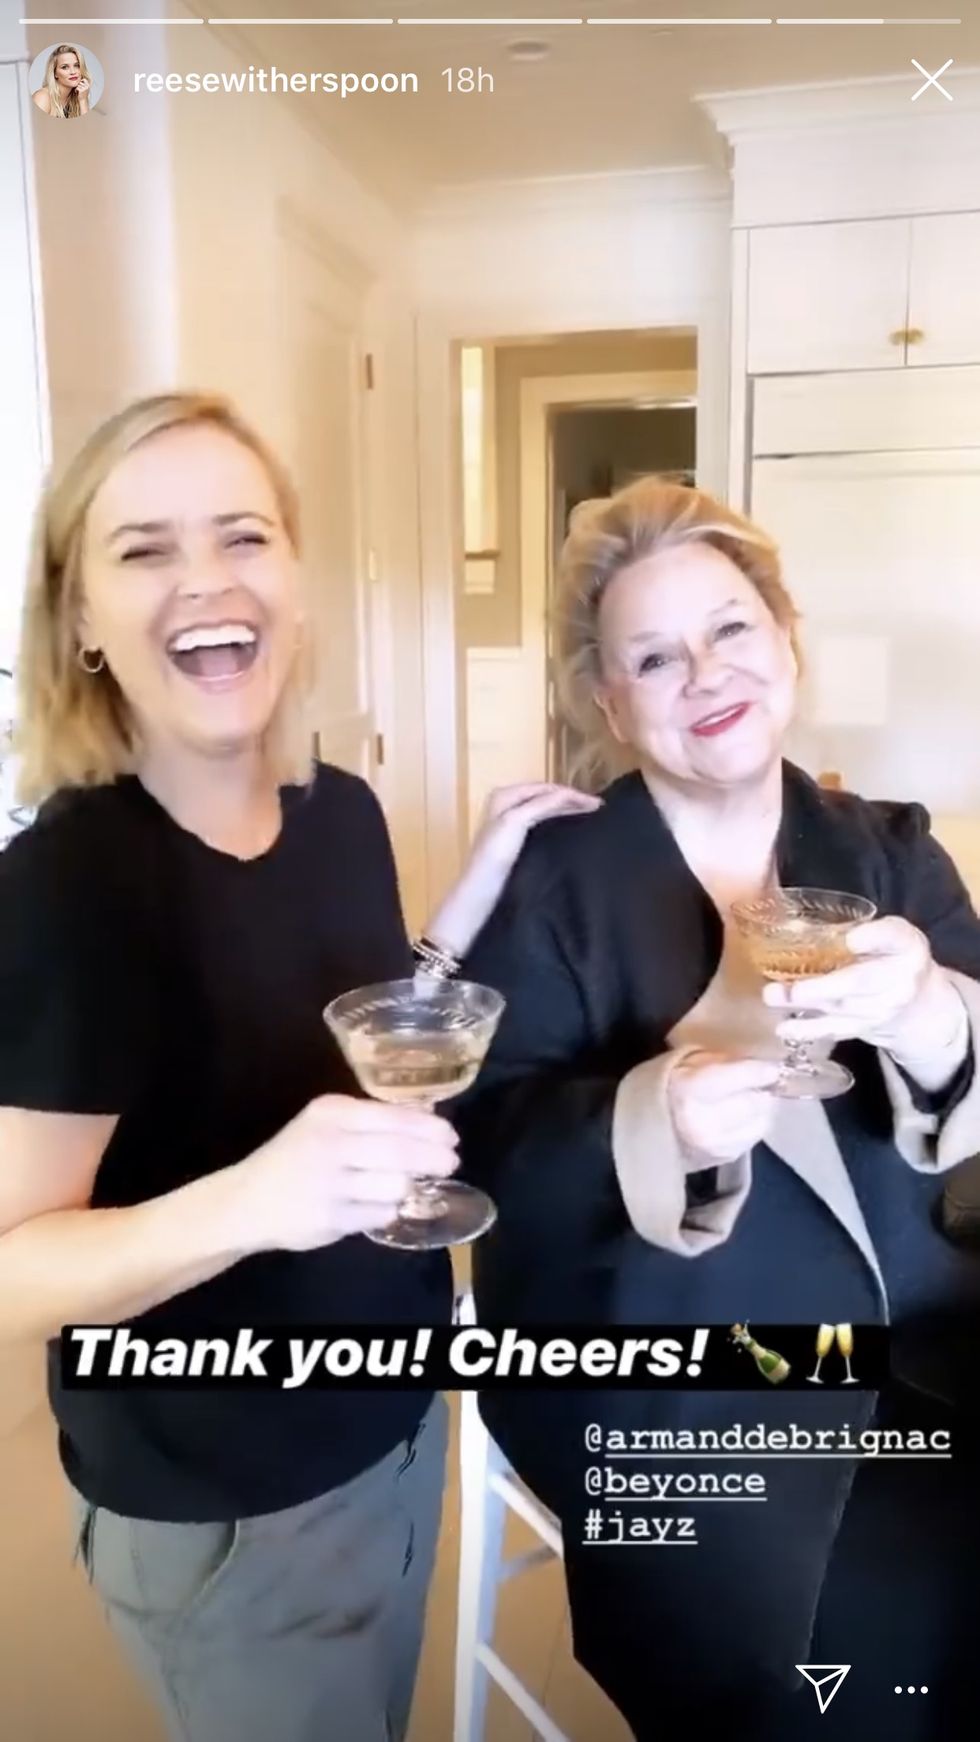 Jay-Z Sent Reese Witherspoon a Case of His Champagne